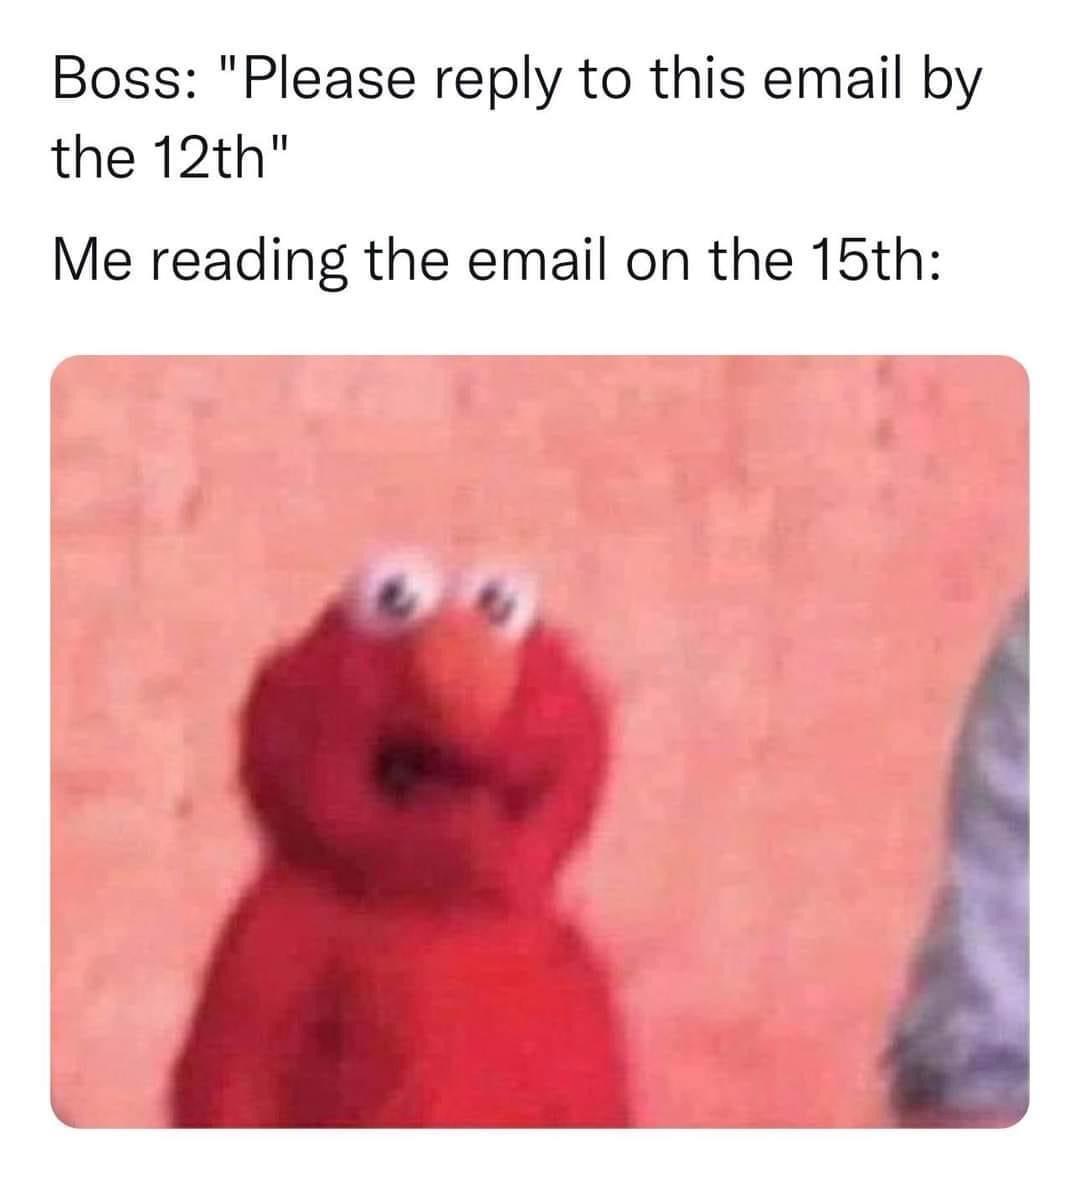 Monday Morning Randomness - send the droidekas - Boss "Please to this email by the 12th" Me reading the email on the 15th